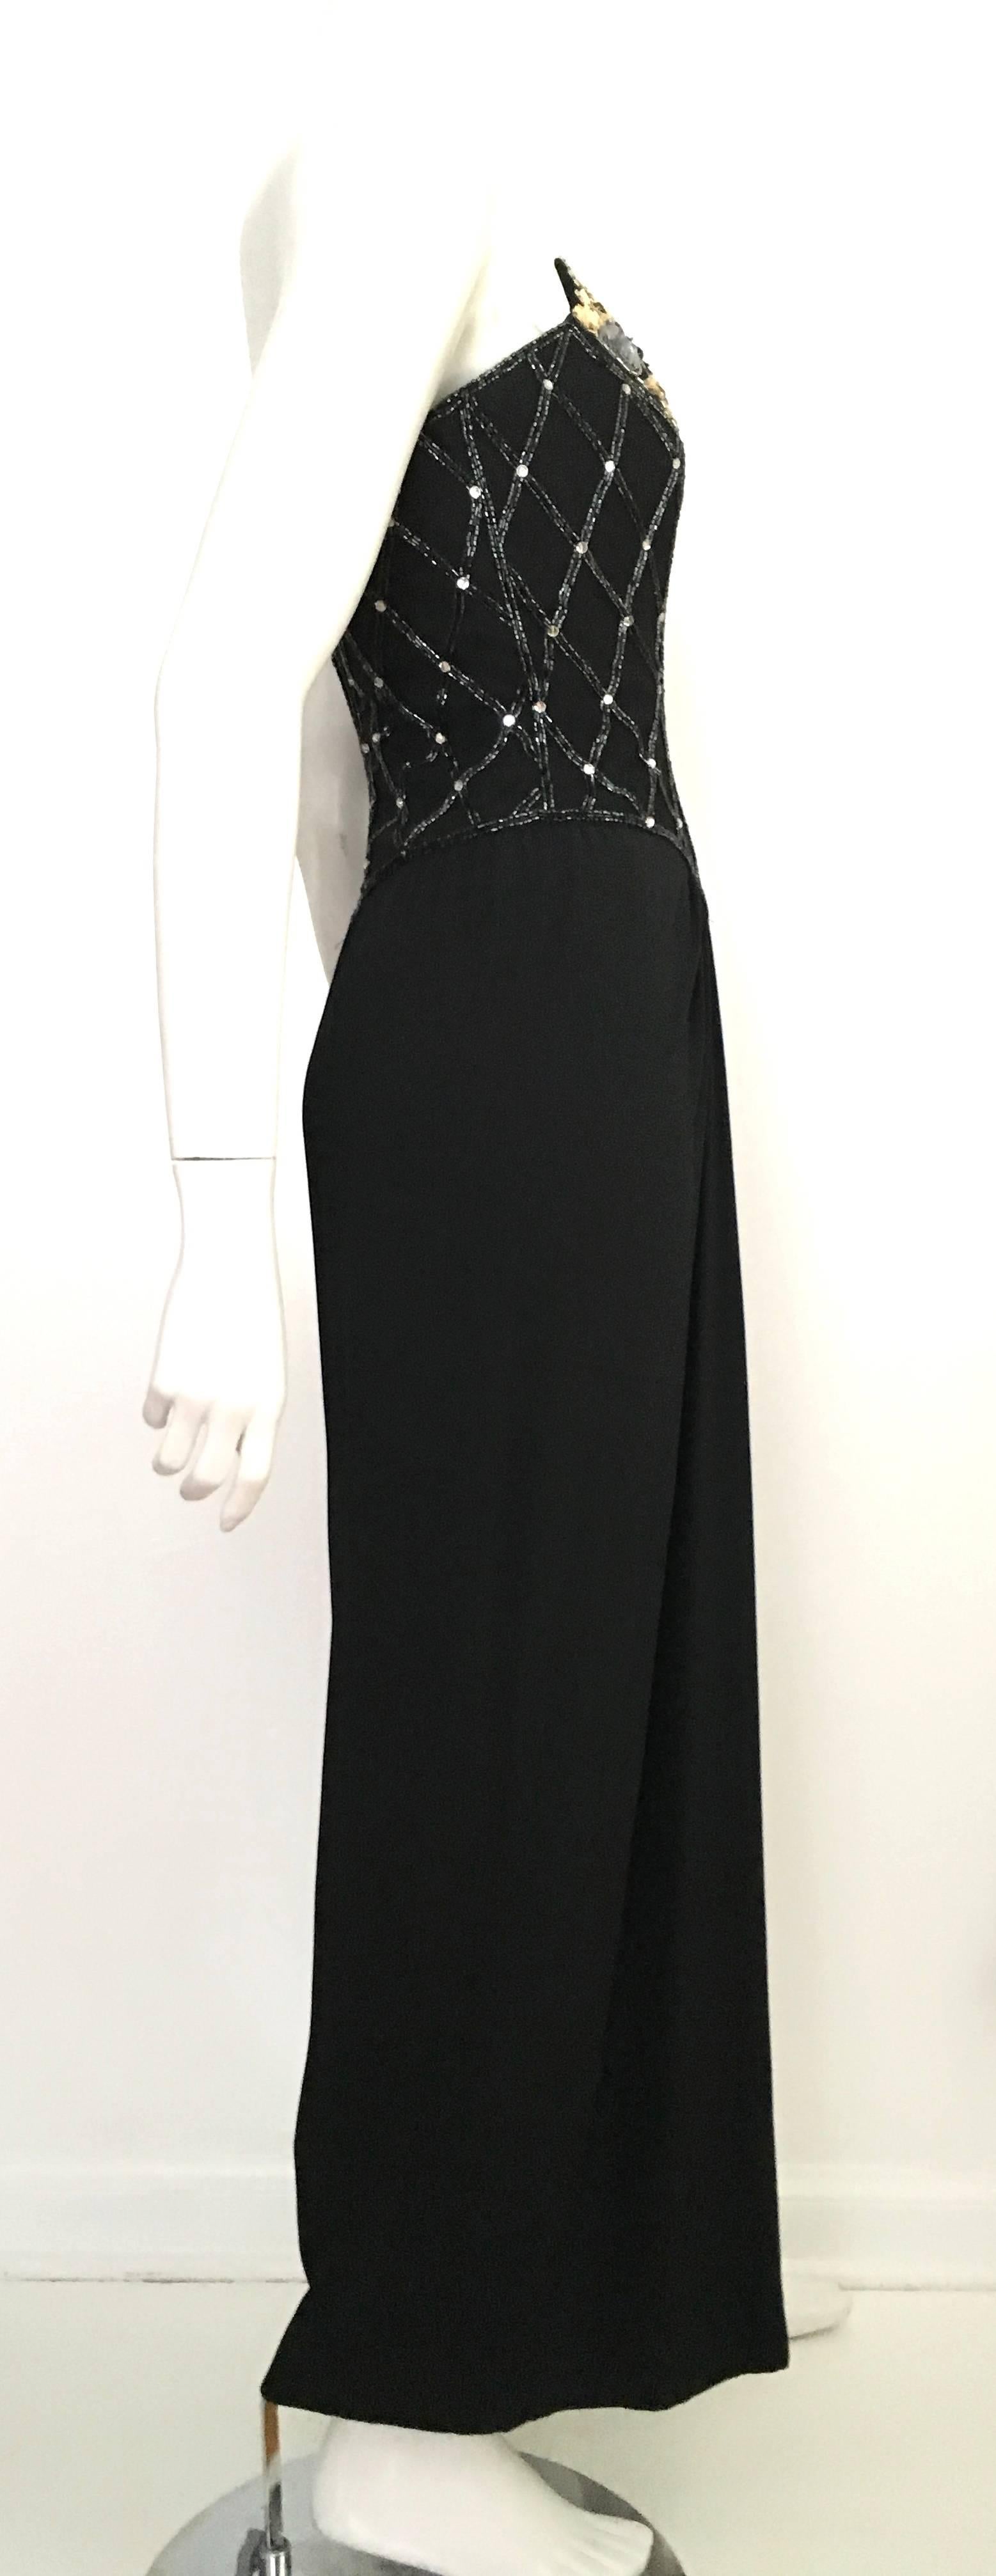 Bob Mackie Black Sequin Strapless Gown Size 6. 1